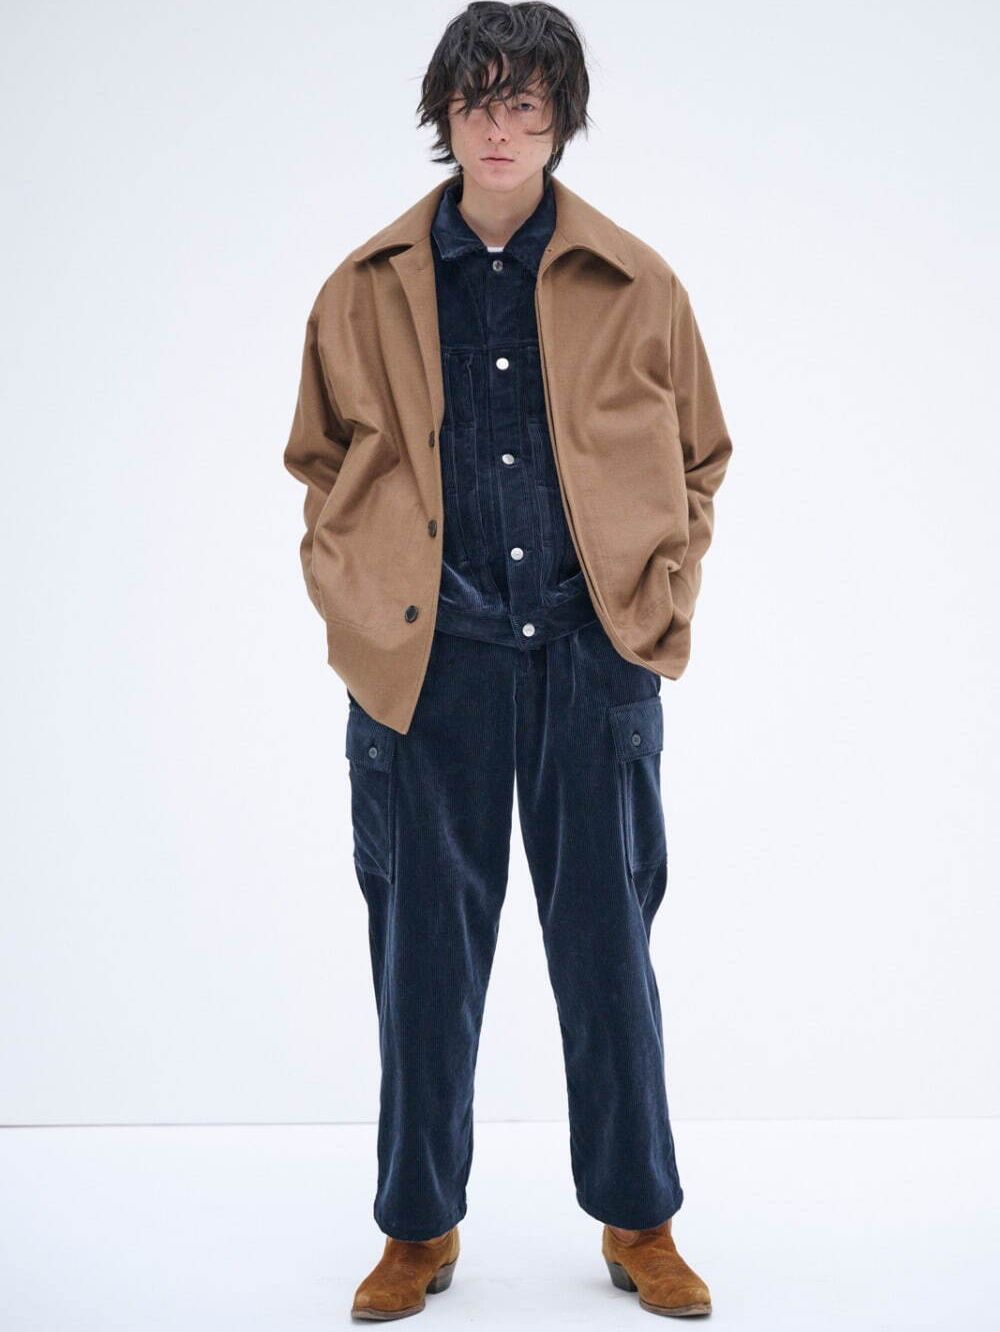 SEVEN BY SEVEN - 【23-24AW】 コーデュロイ ジャケット - 1st Type ...